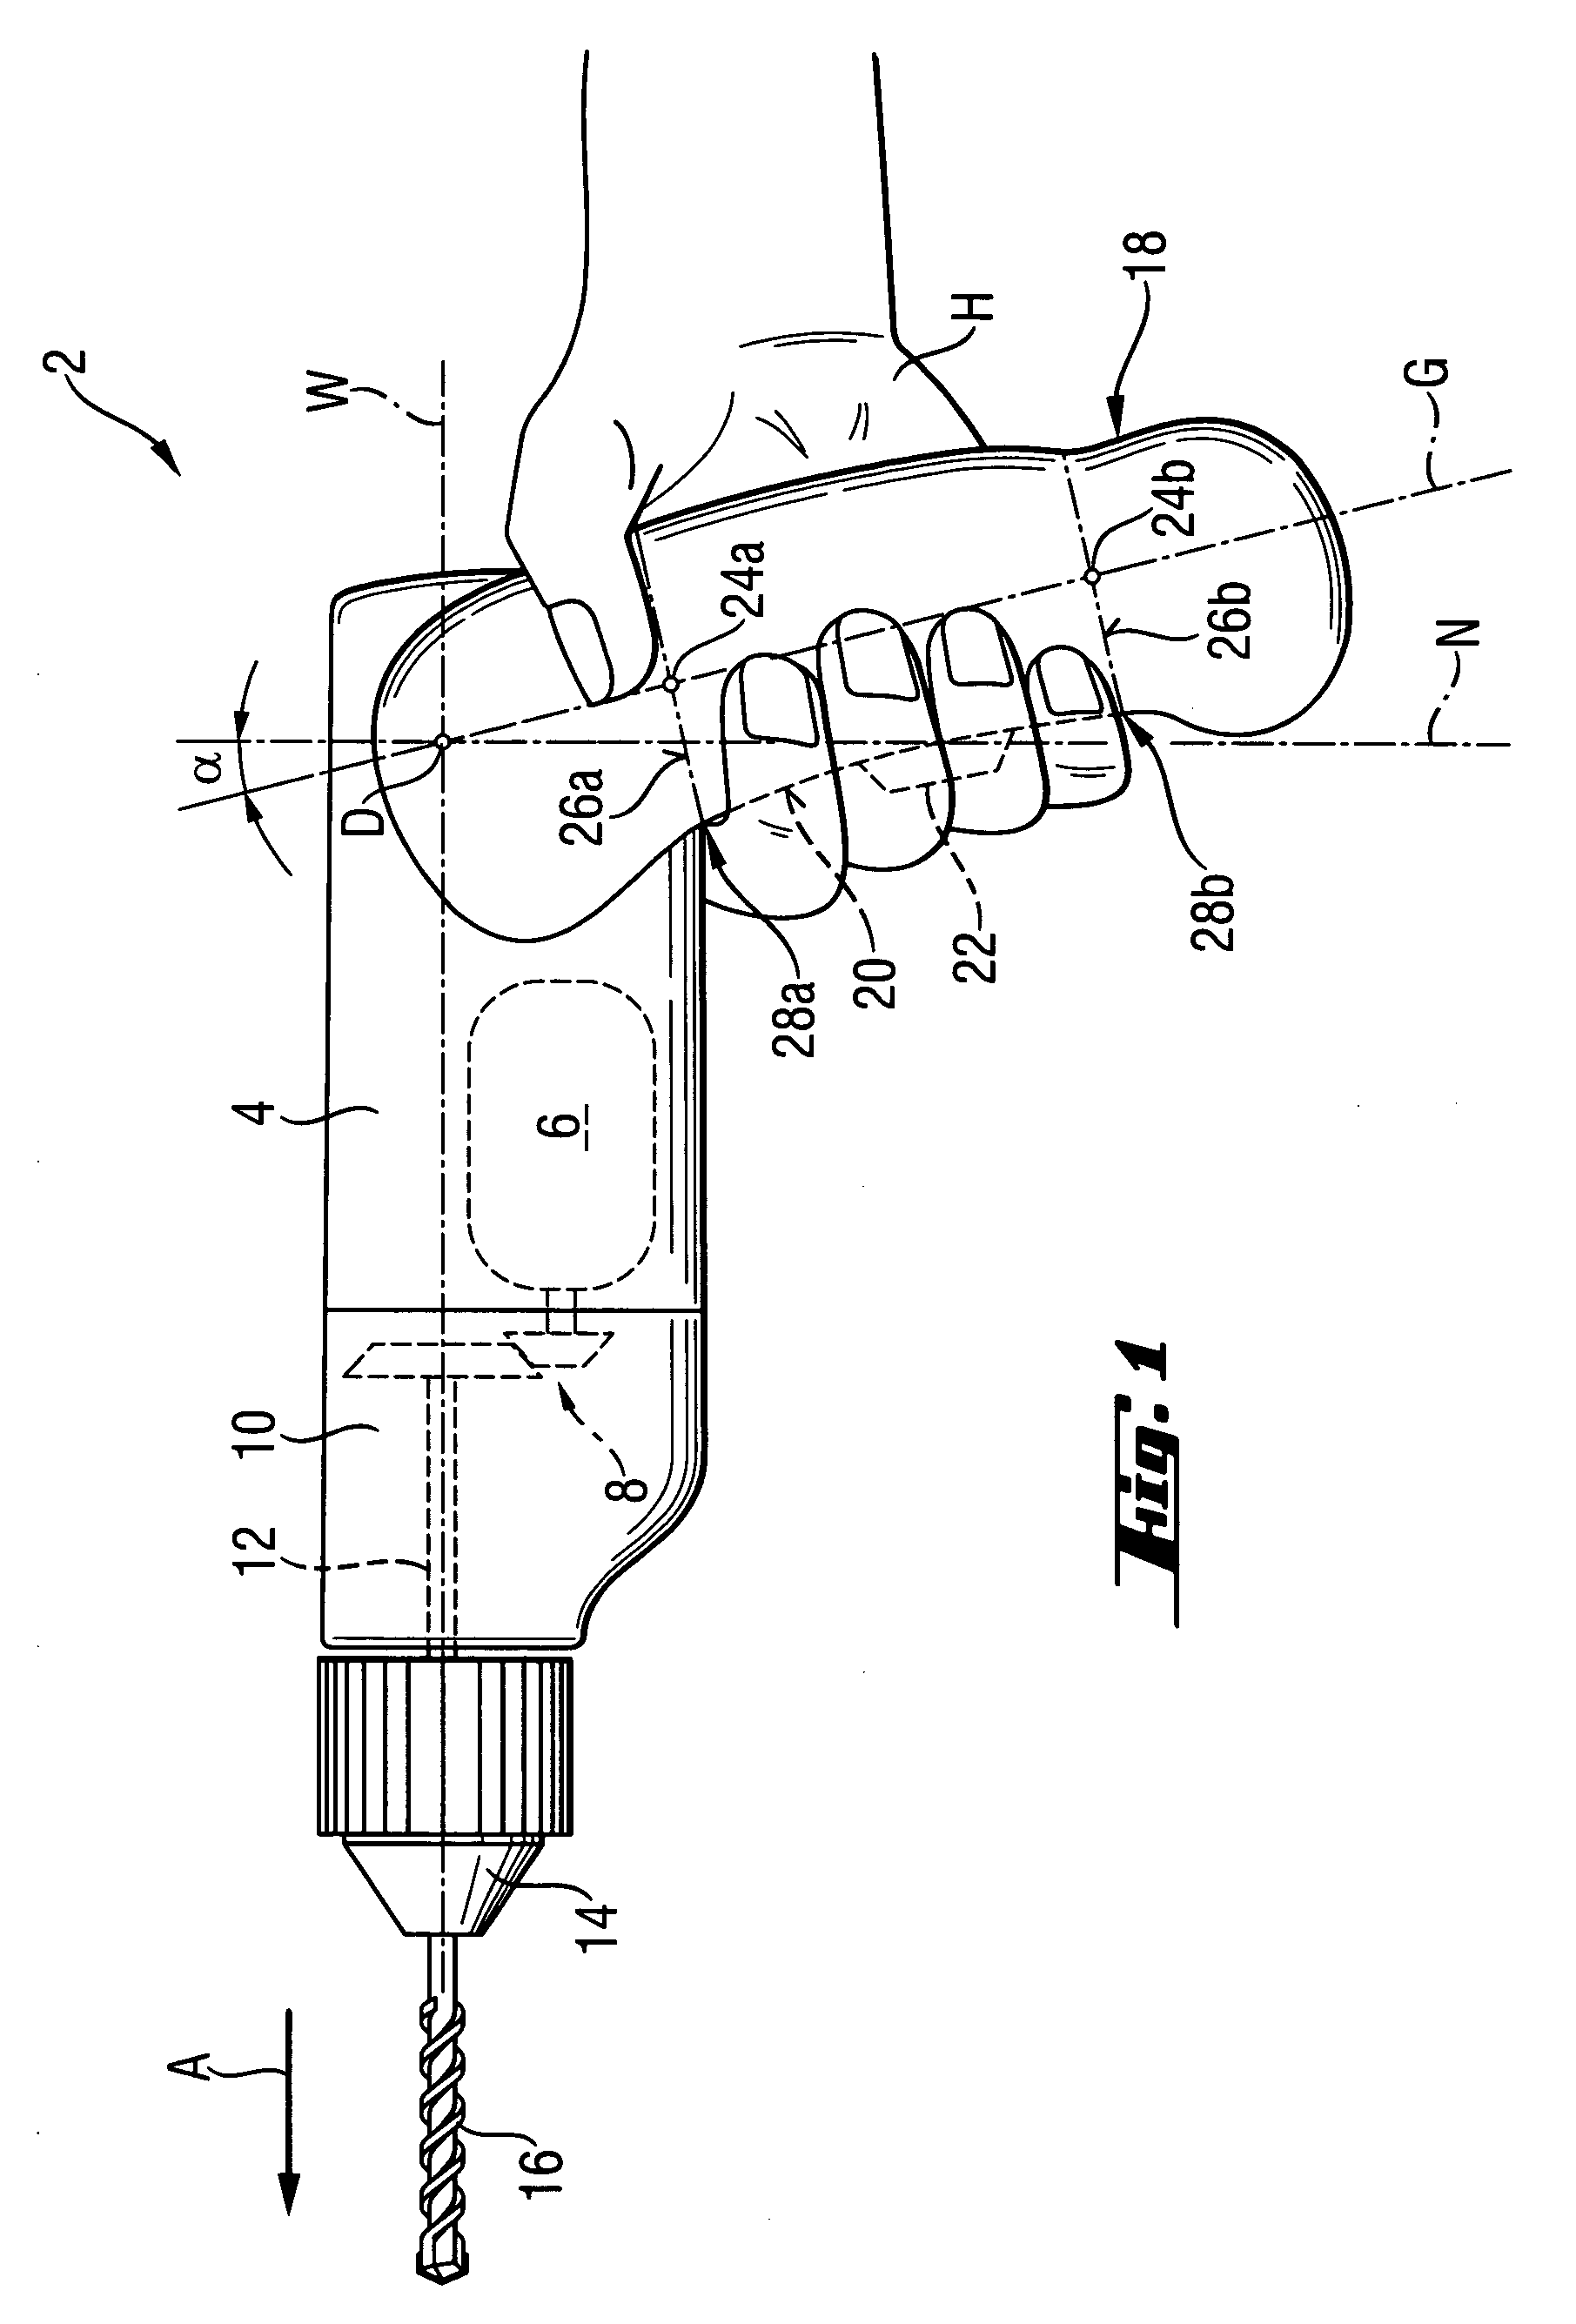 Handle for a hand-held power tool